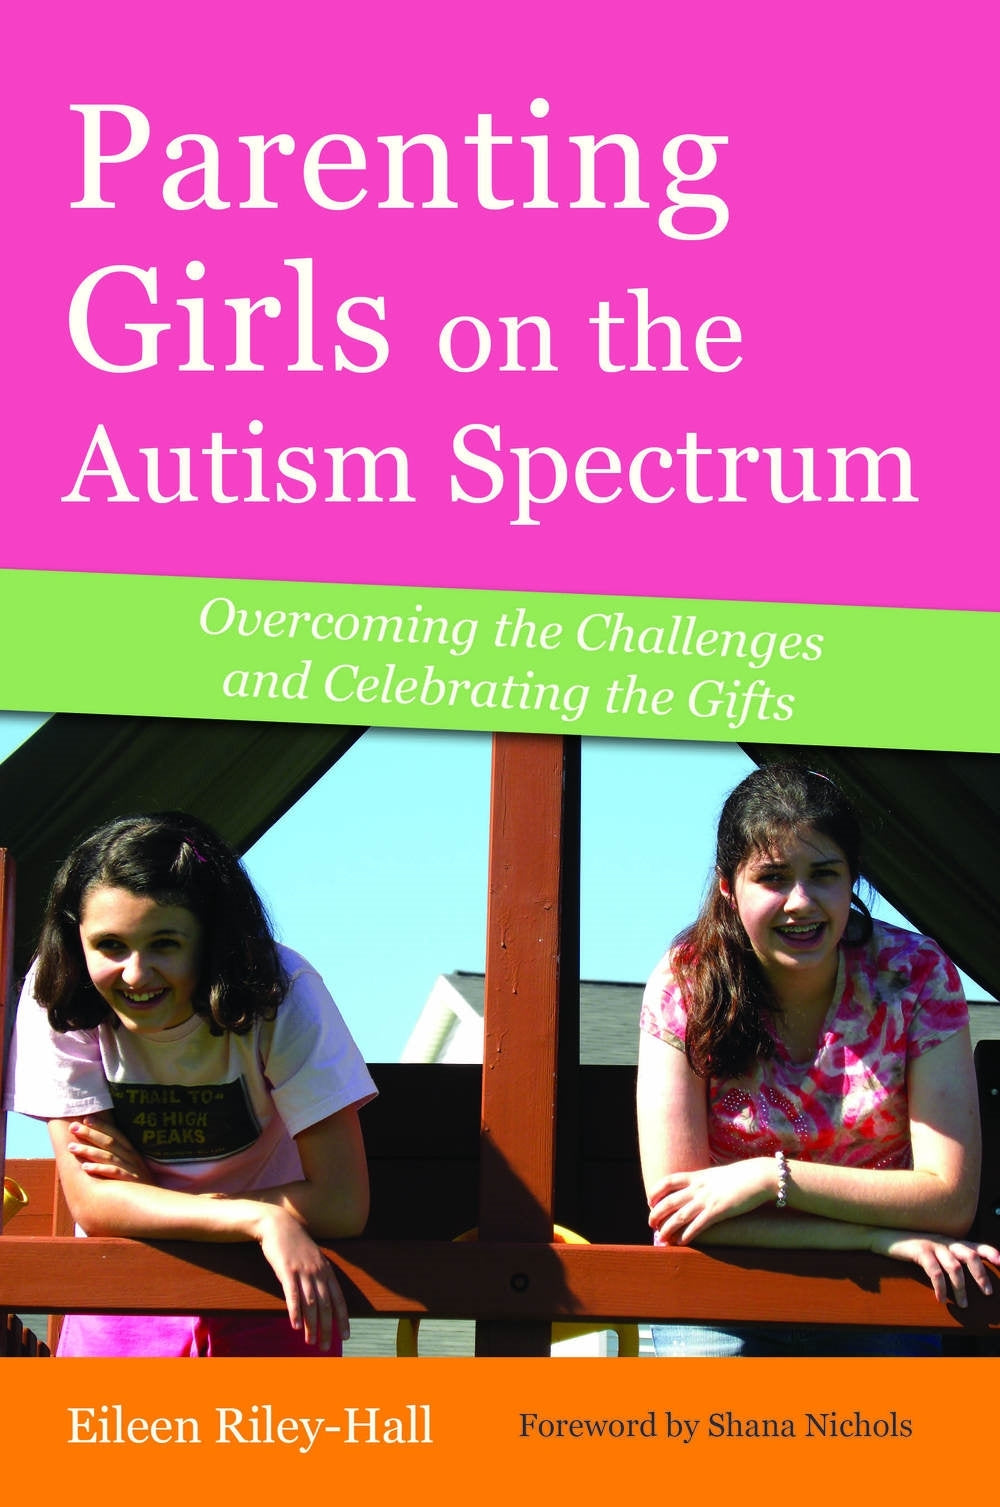 Parenting Girls on the Autism Spectrum by Eileen Riley-Hall, Shana Nichols